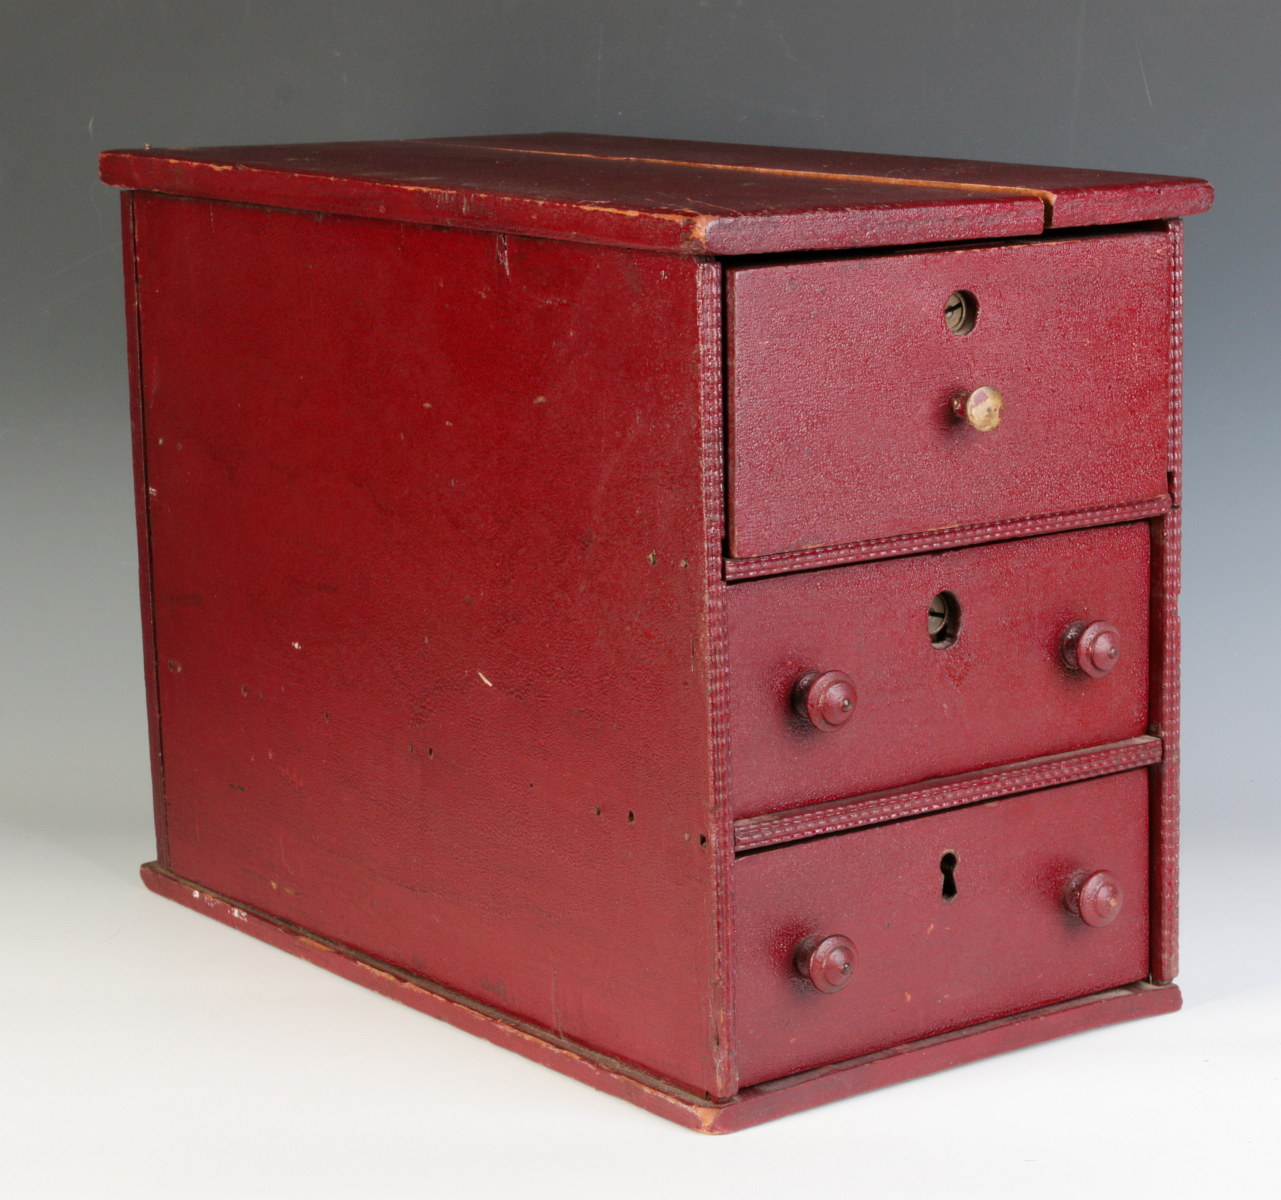 A RED FOLKY BANK OF DRAWERS, THREE DRAWER SET